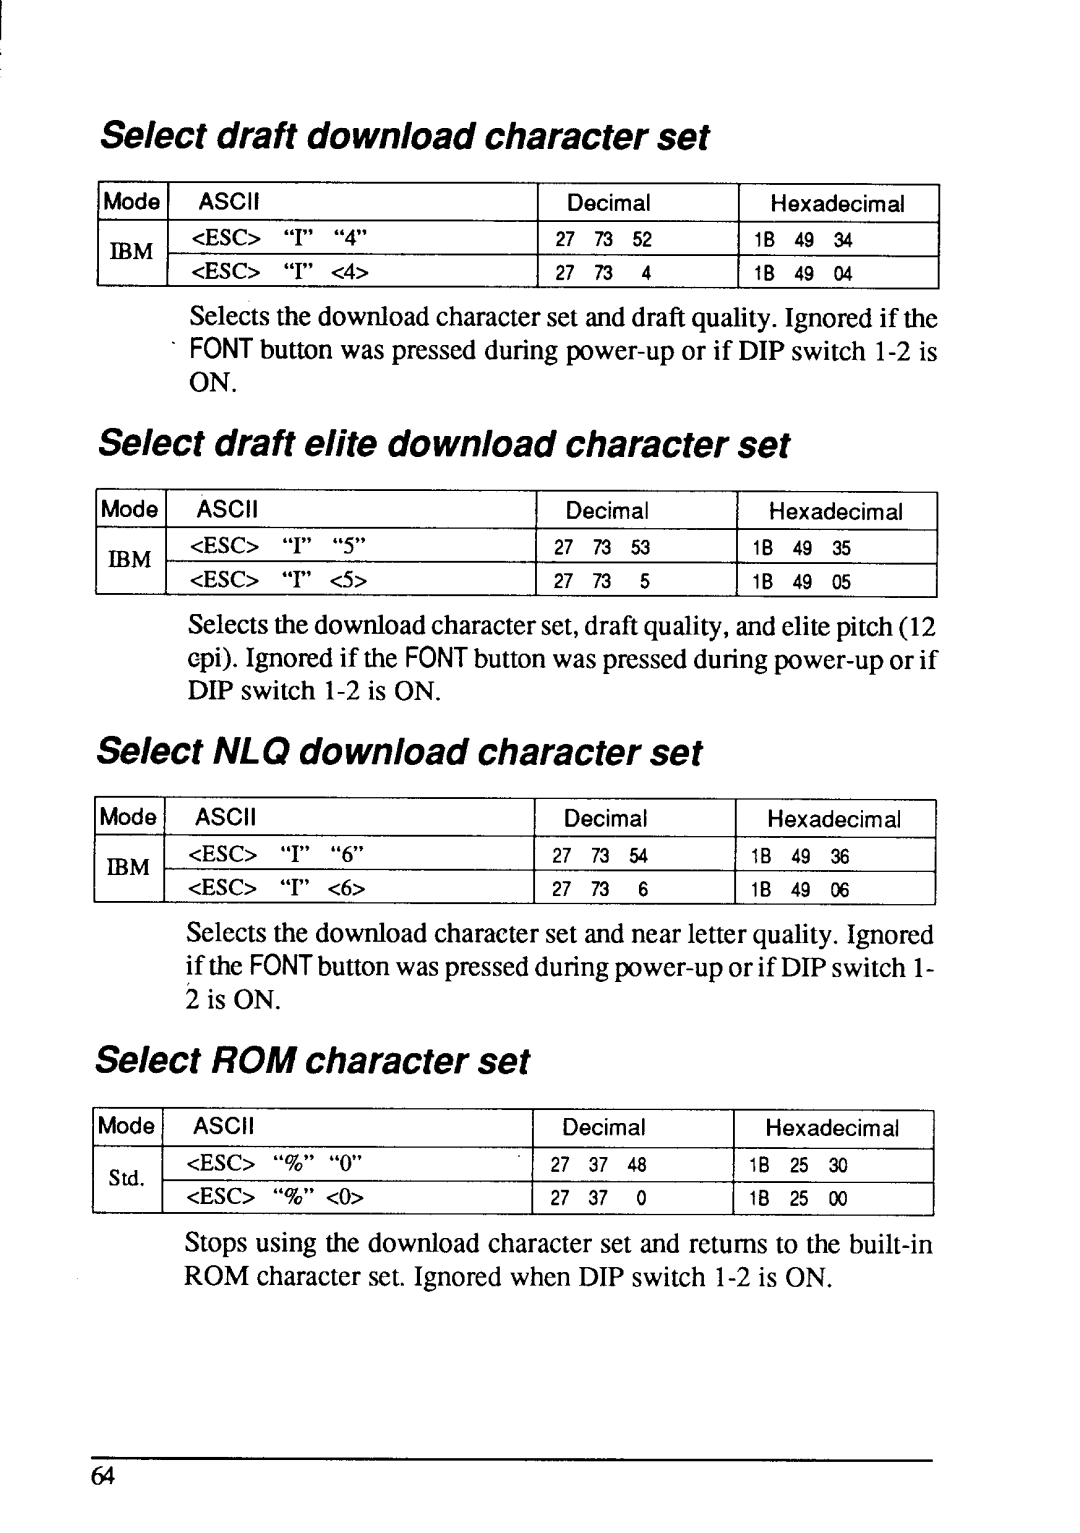 Star Micronics NX-1001 manual Selectsthe downloadcharacterset anddraftquality.Ignoredif the 